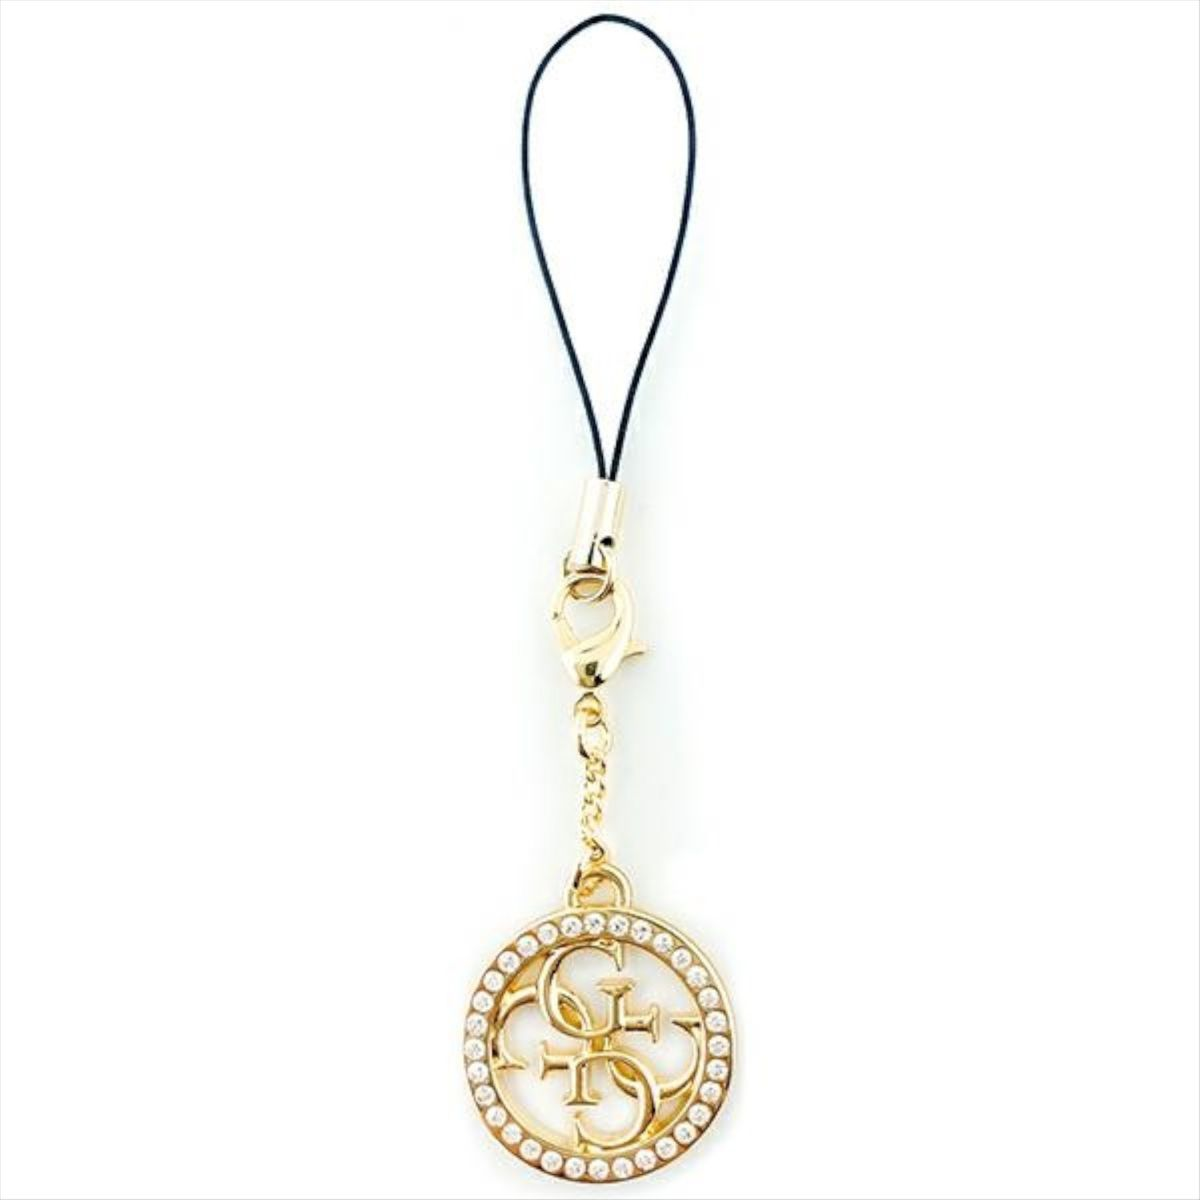 GUESS Guess Phone Strap 4G Charm Anhänger, Universell, Gold Umhängetasche, Rhinestone Universell